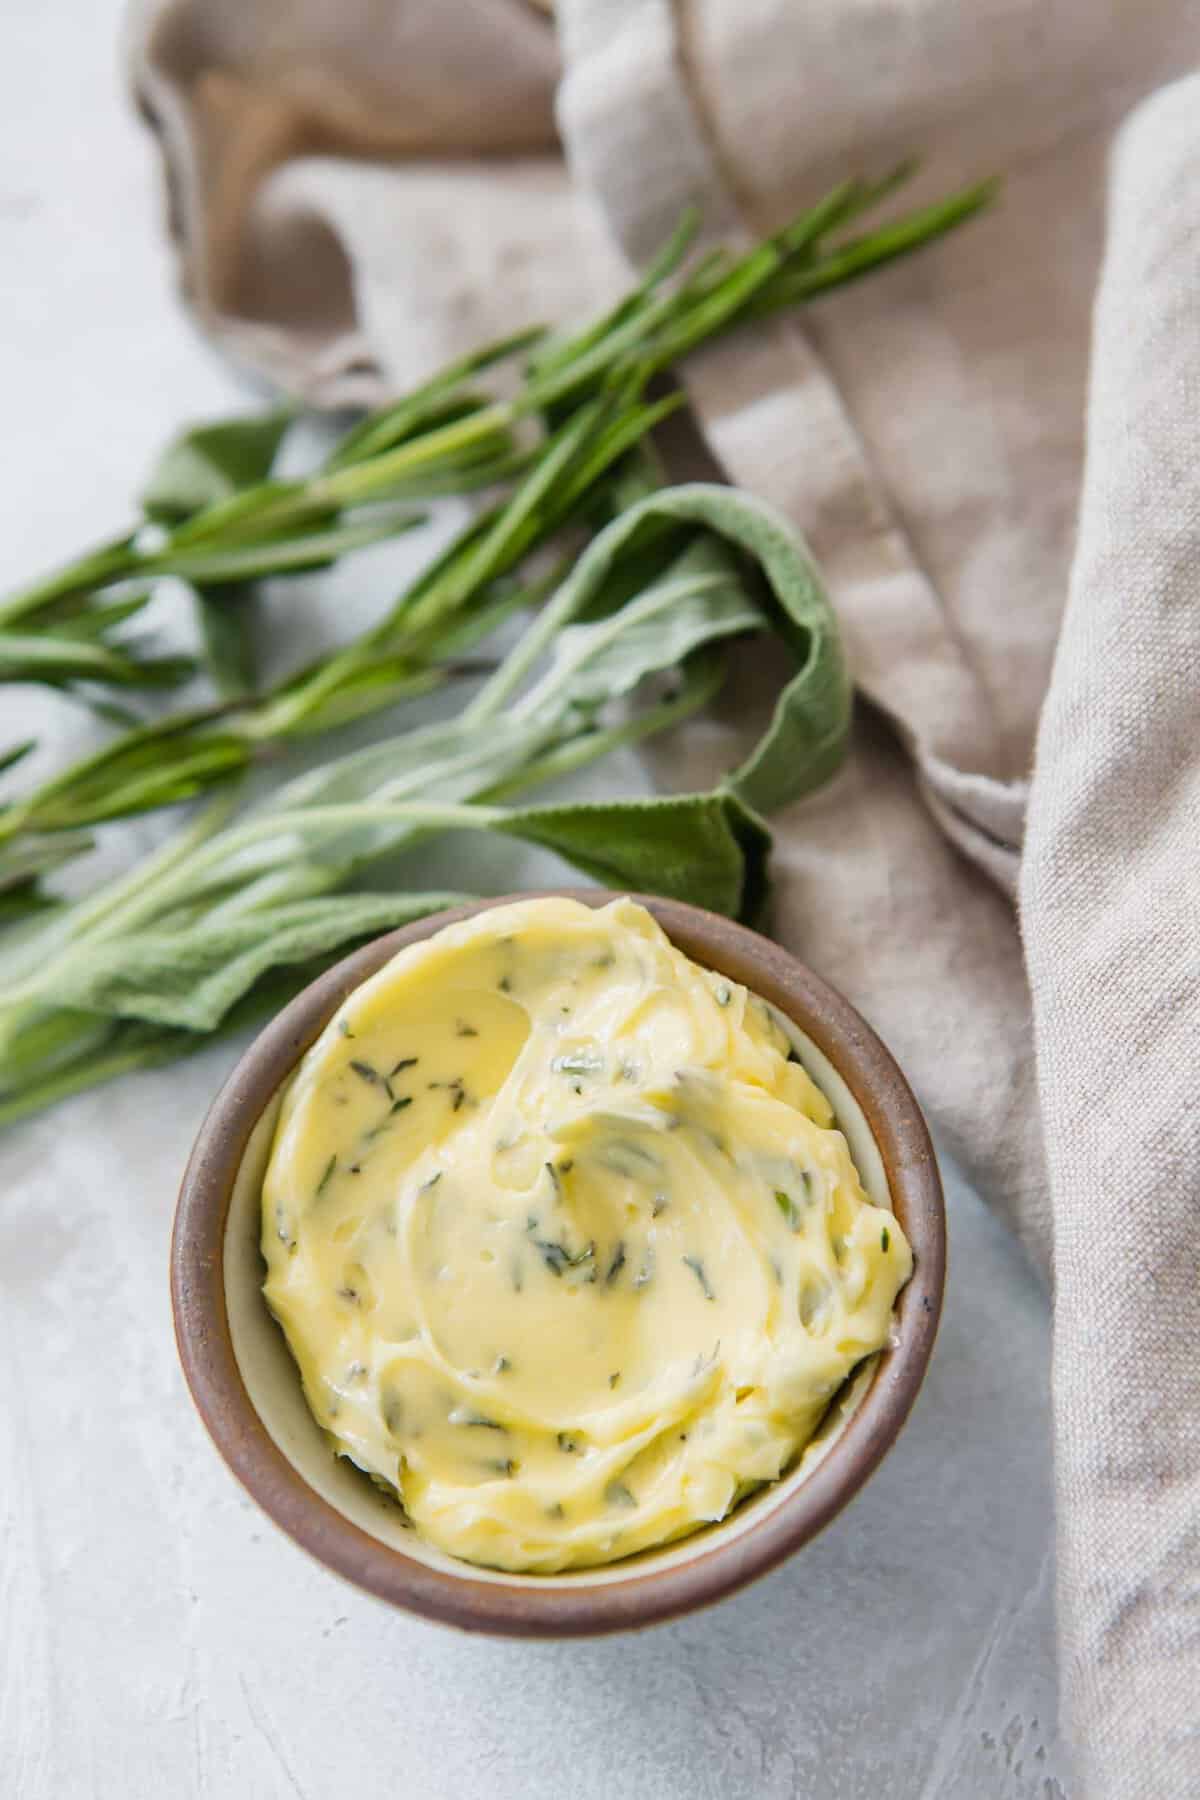 Closeup of small bowl filled with compound butter with sprigs of herbs in background